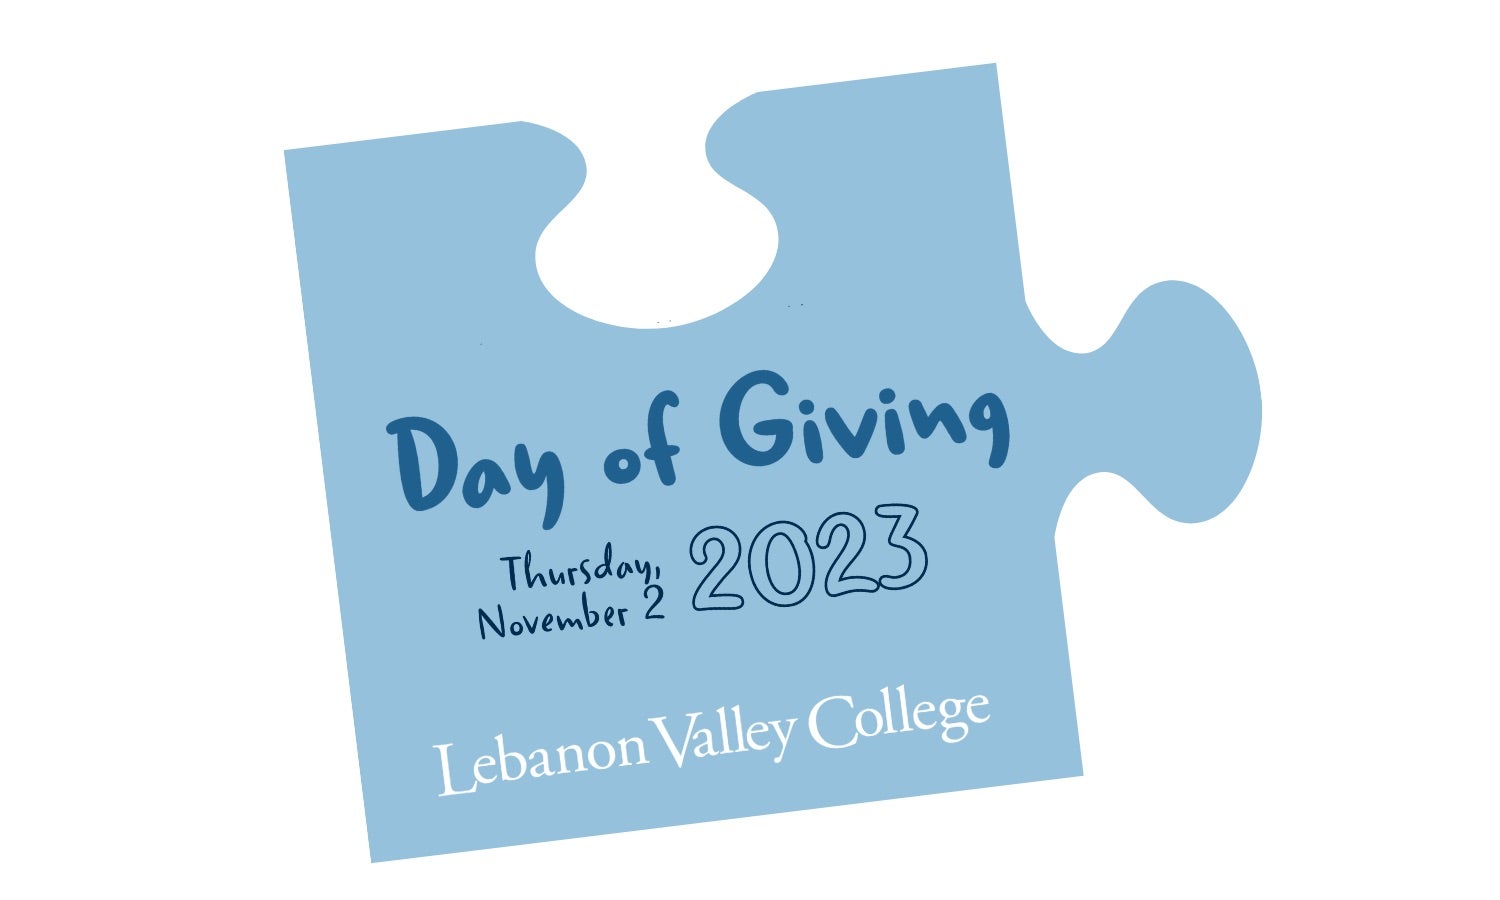 LVC 2023 Day of Giving puzzle piece design